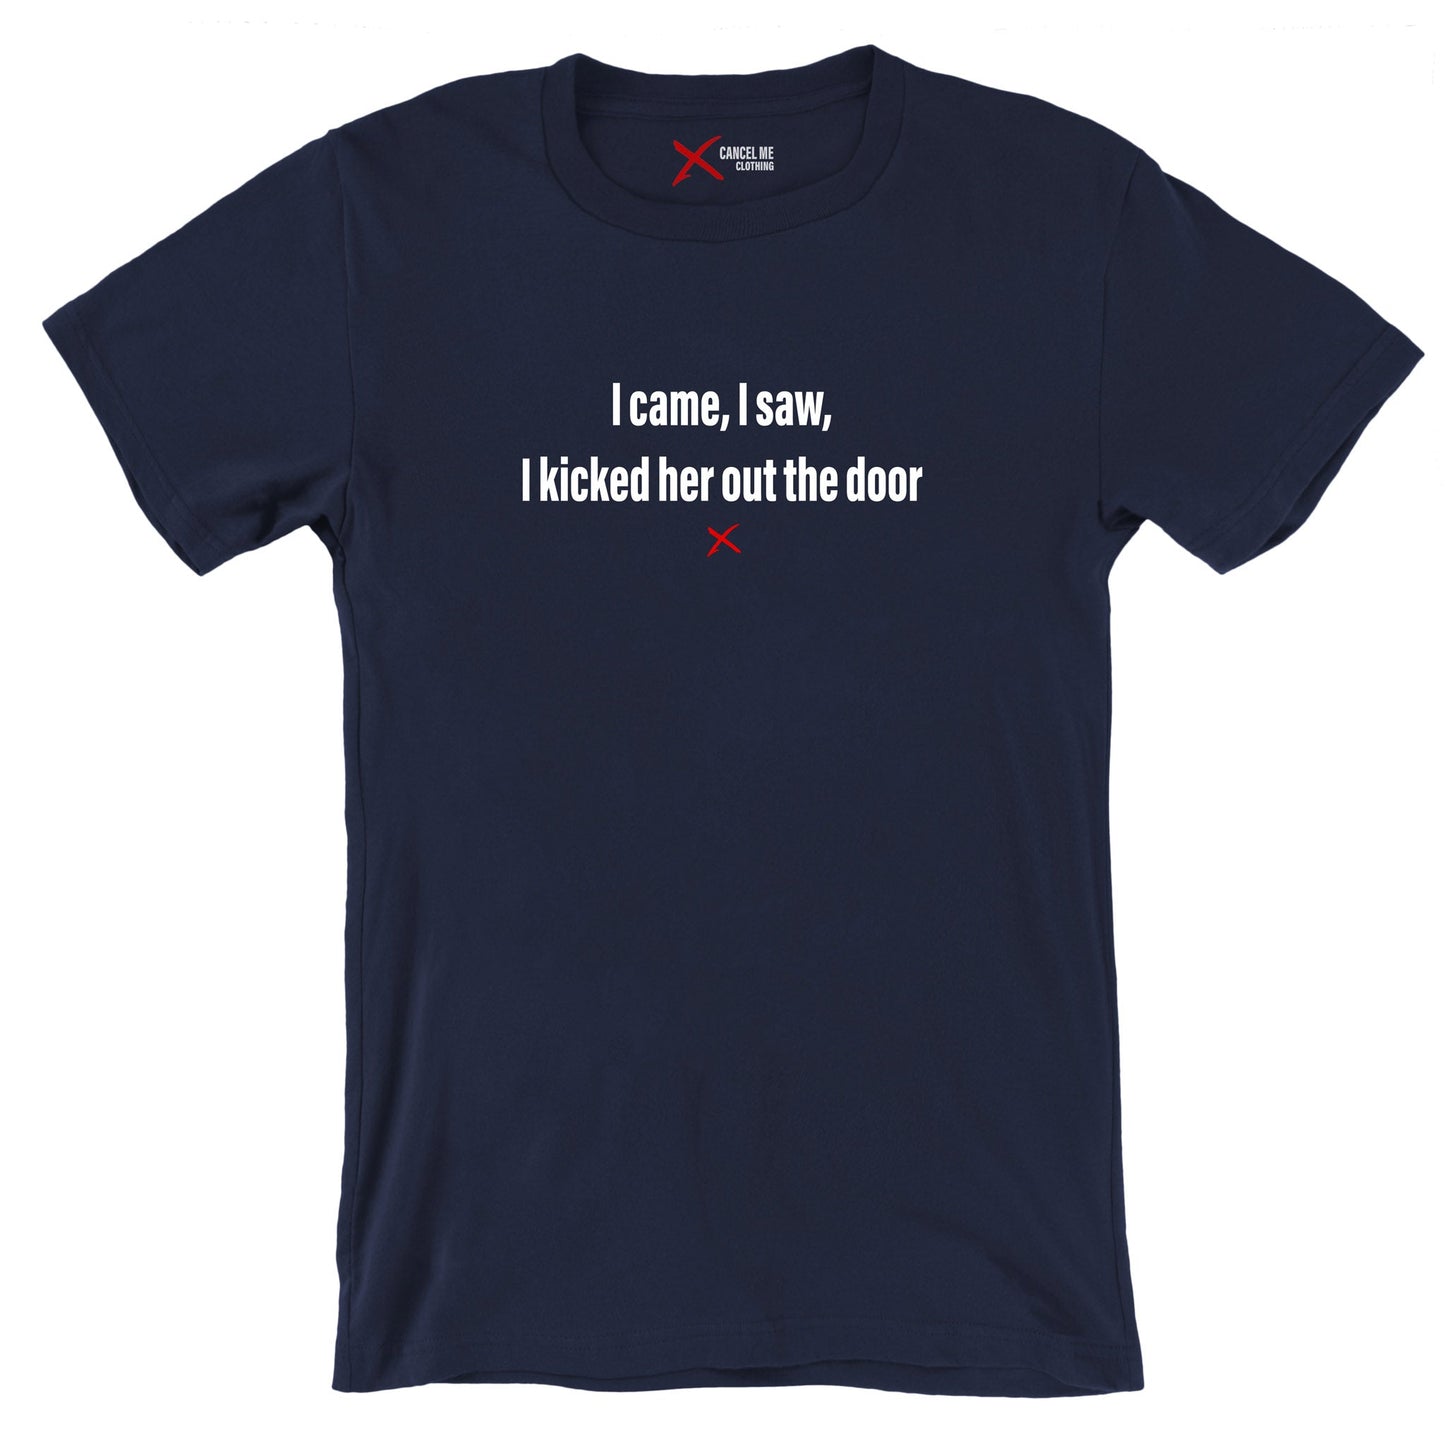 I came, I saw, I kicked her out the door - Shirt